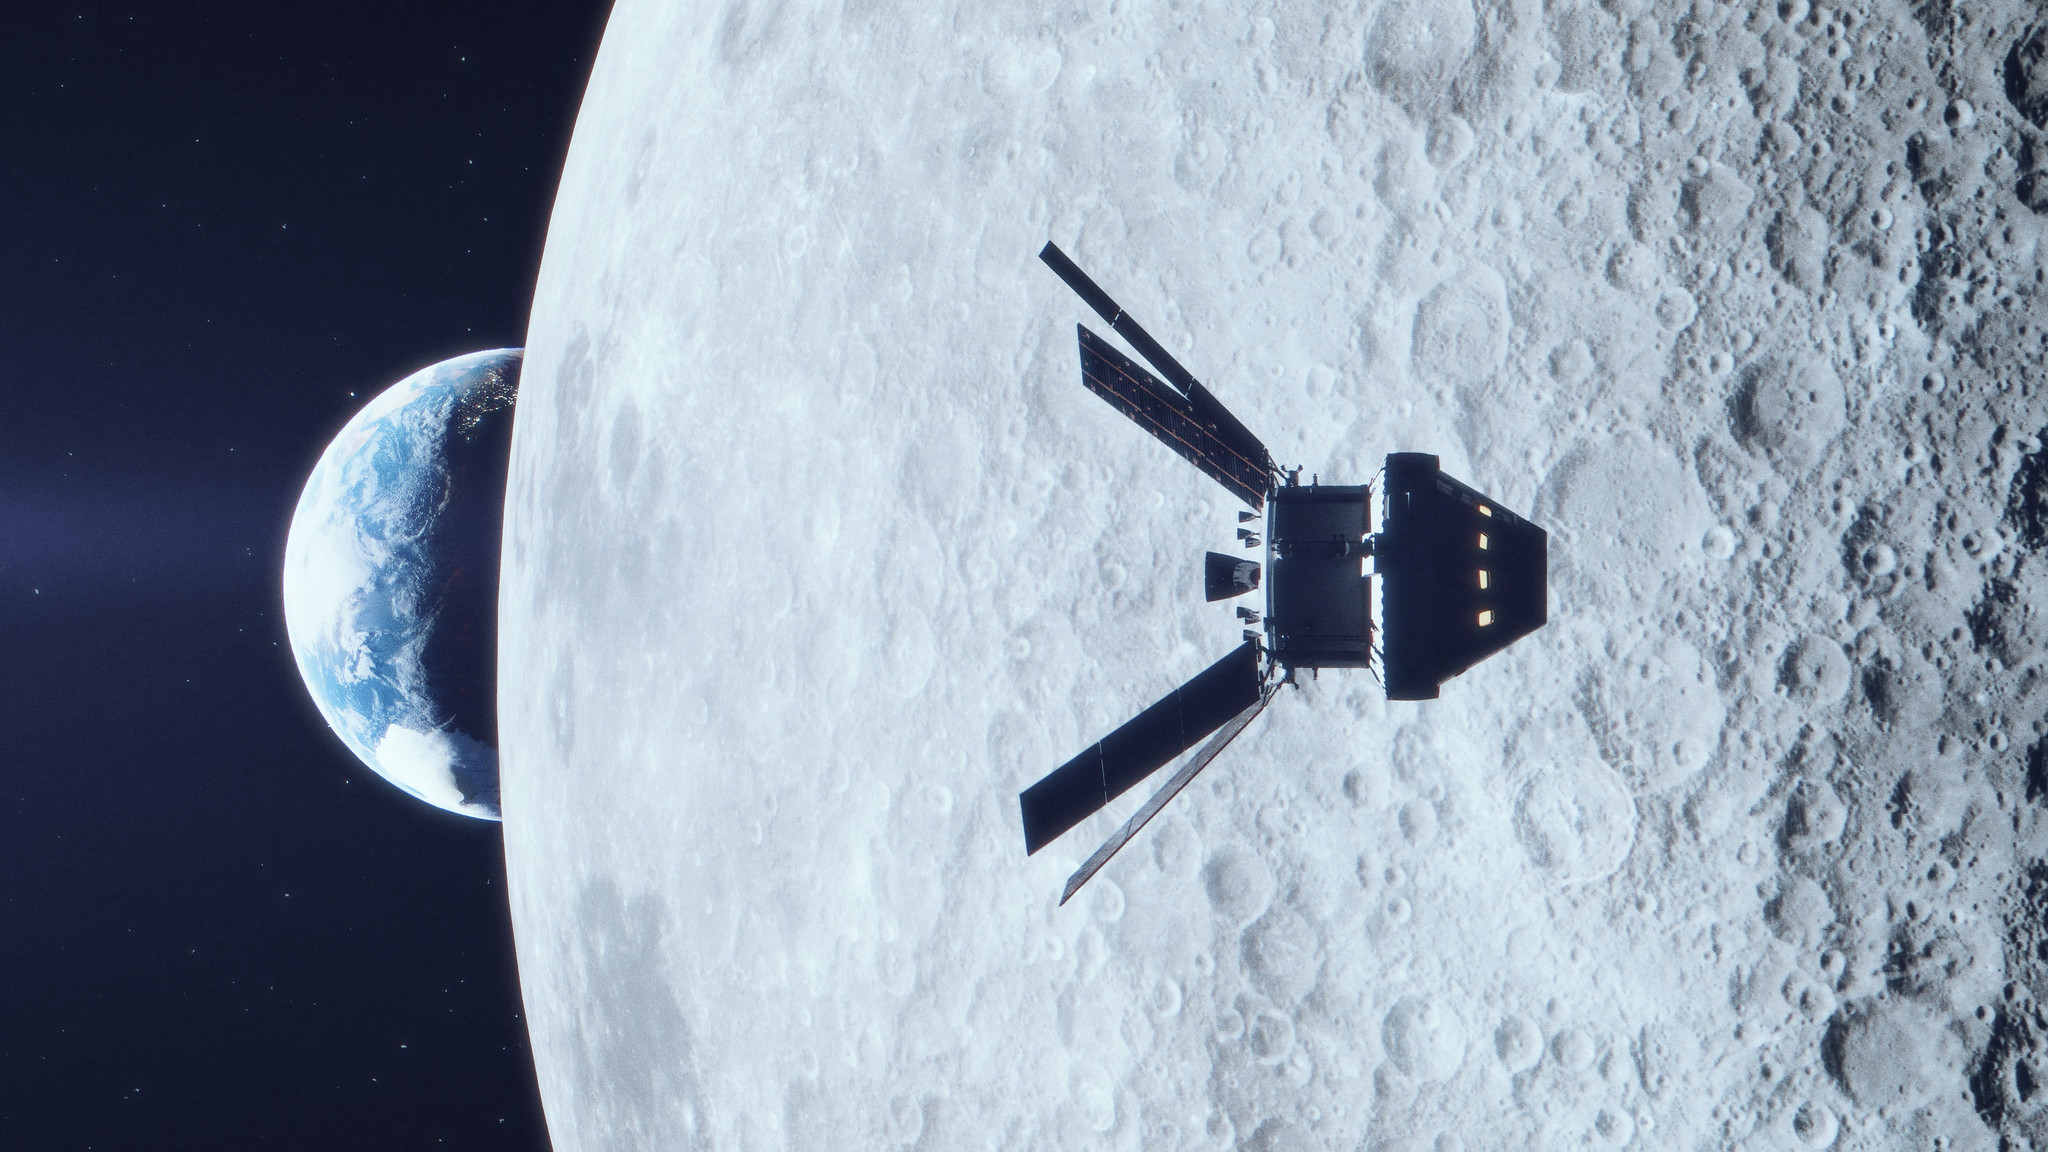 silhouette of orion spacecraft in front of moon, during earthrise